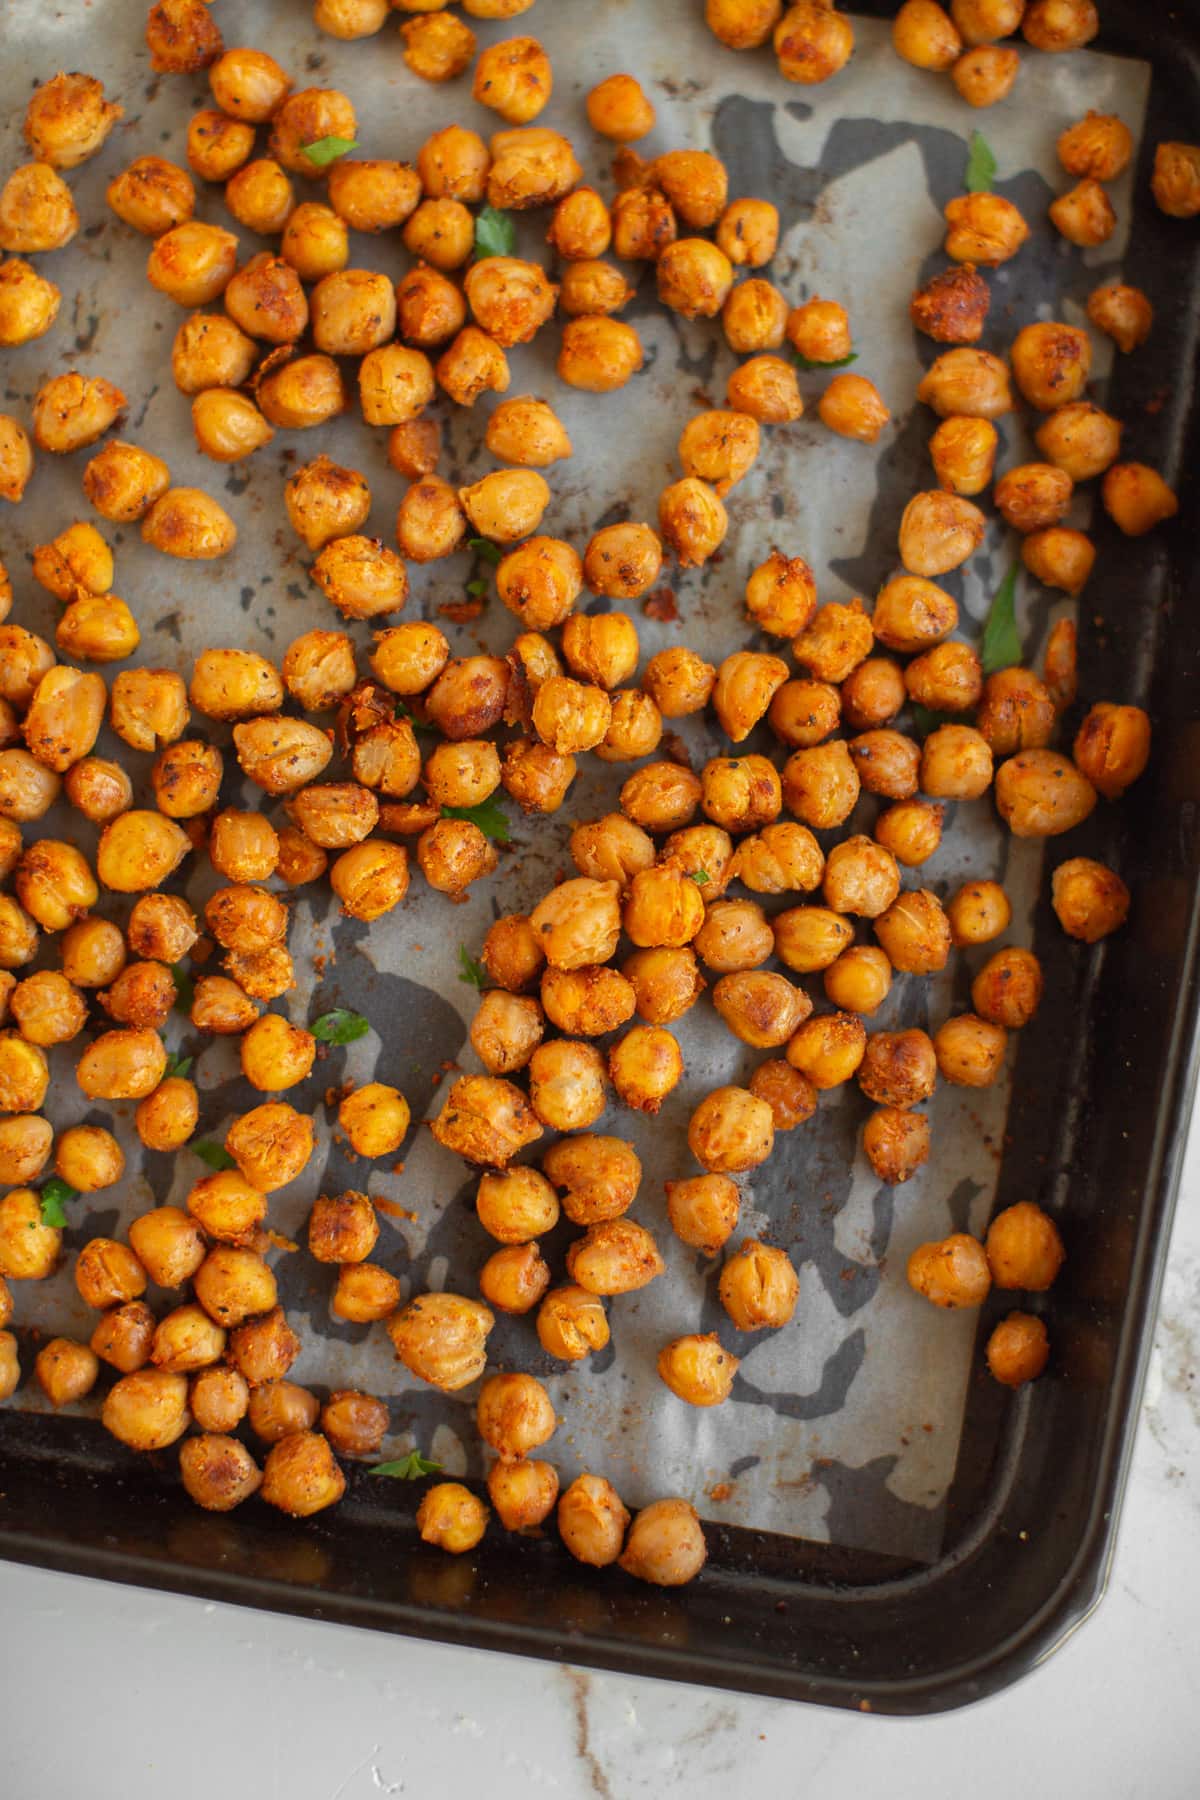 Roasted chickpeas on a baking sheet.